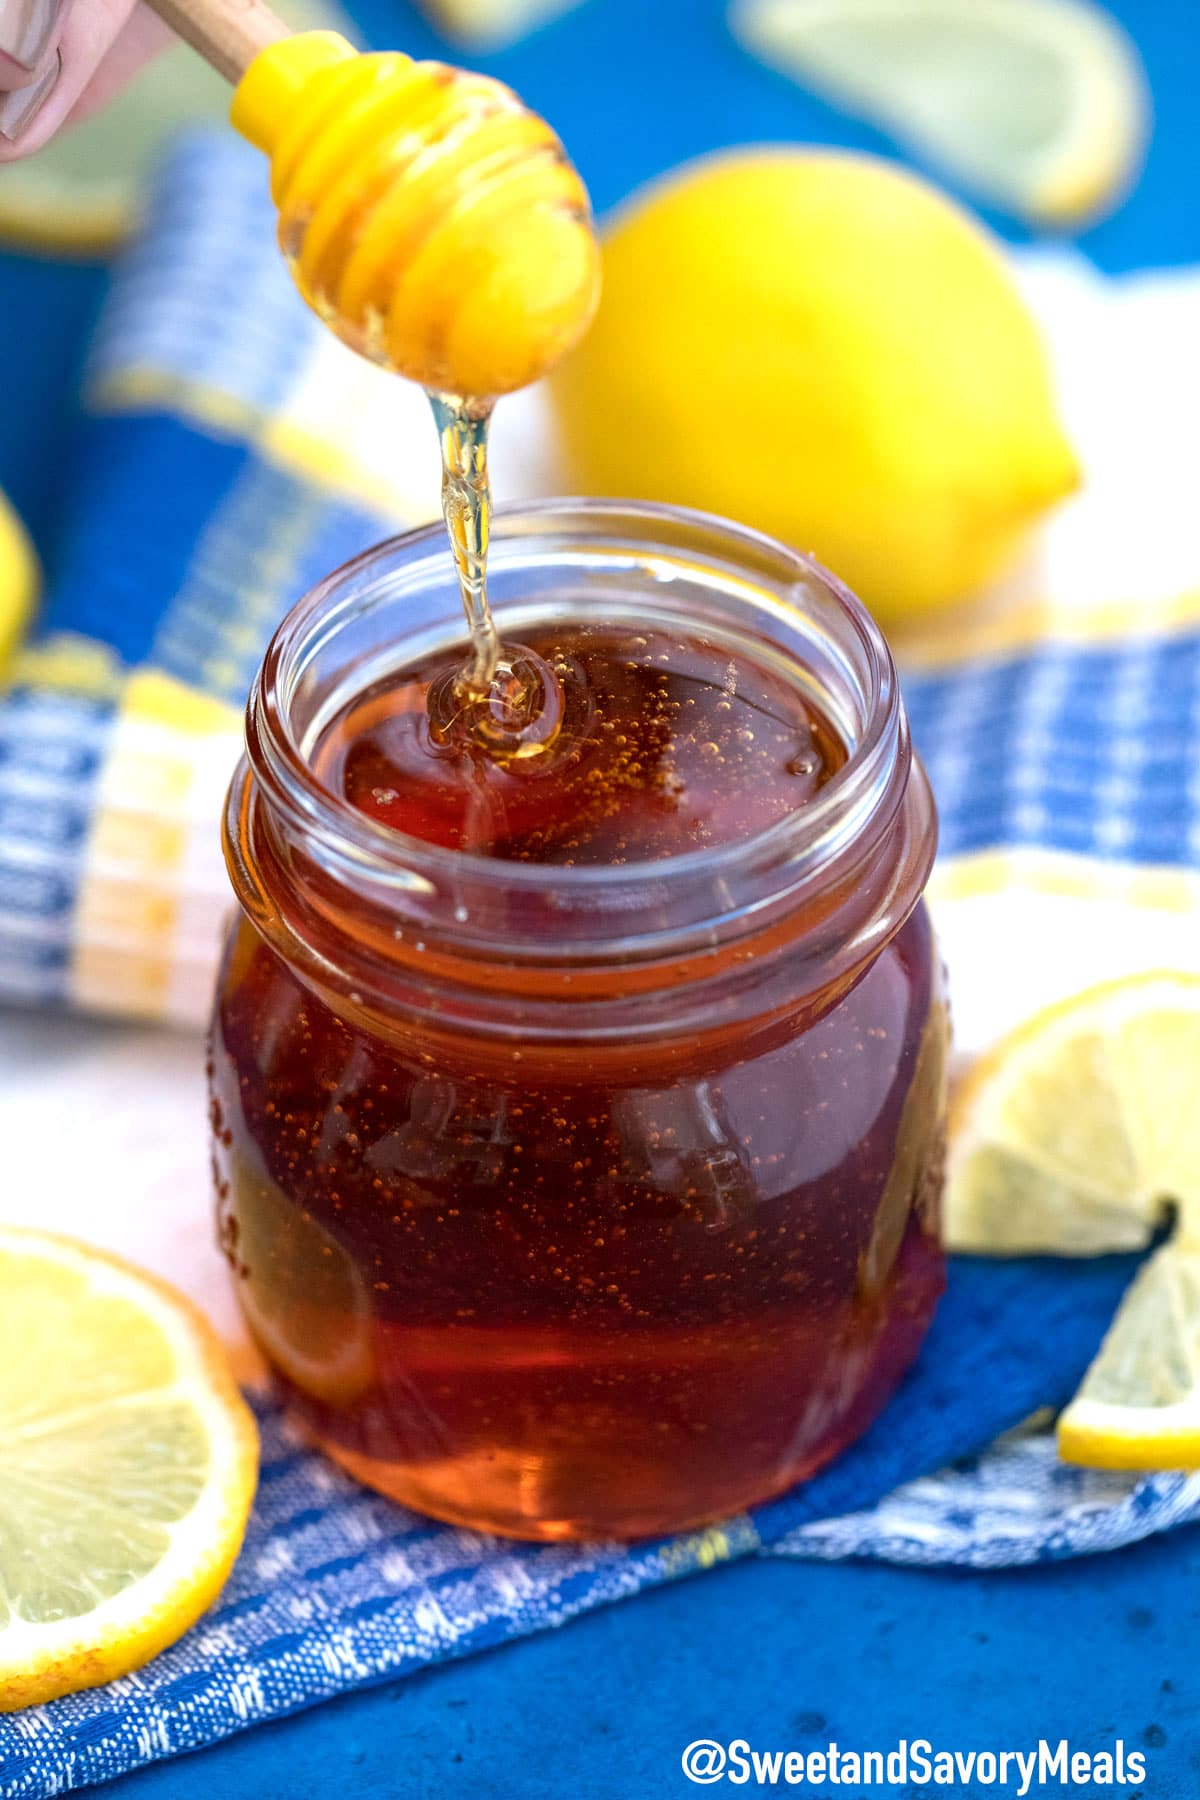 Golden Syrup Recipe 